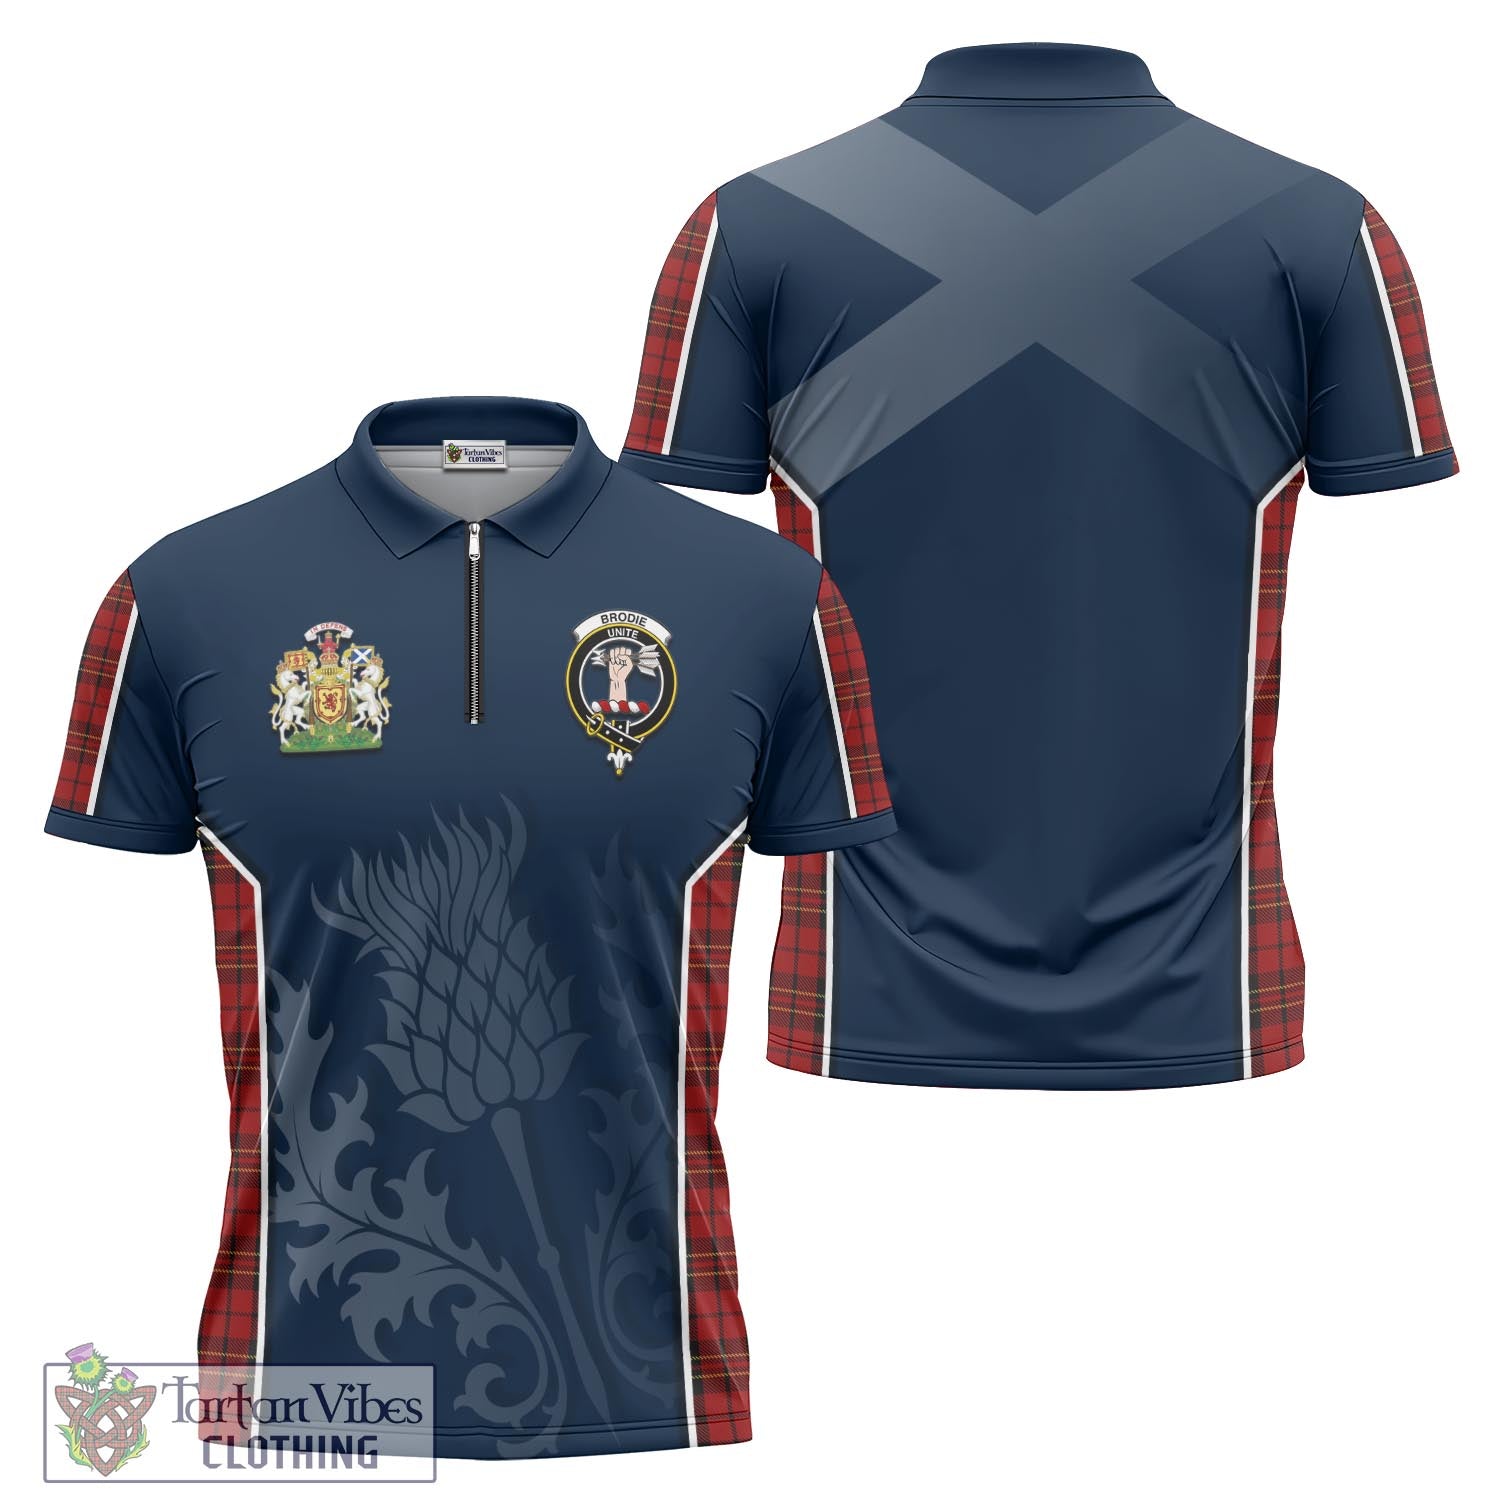 Tartan Vibes Clothing Brodie Tartan Zipper Polo Shirt with Family Crest and Scottish Thistle Vibes Sport Style